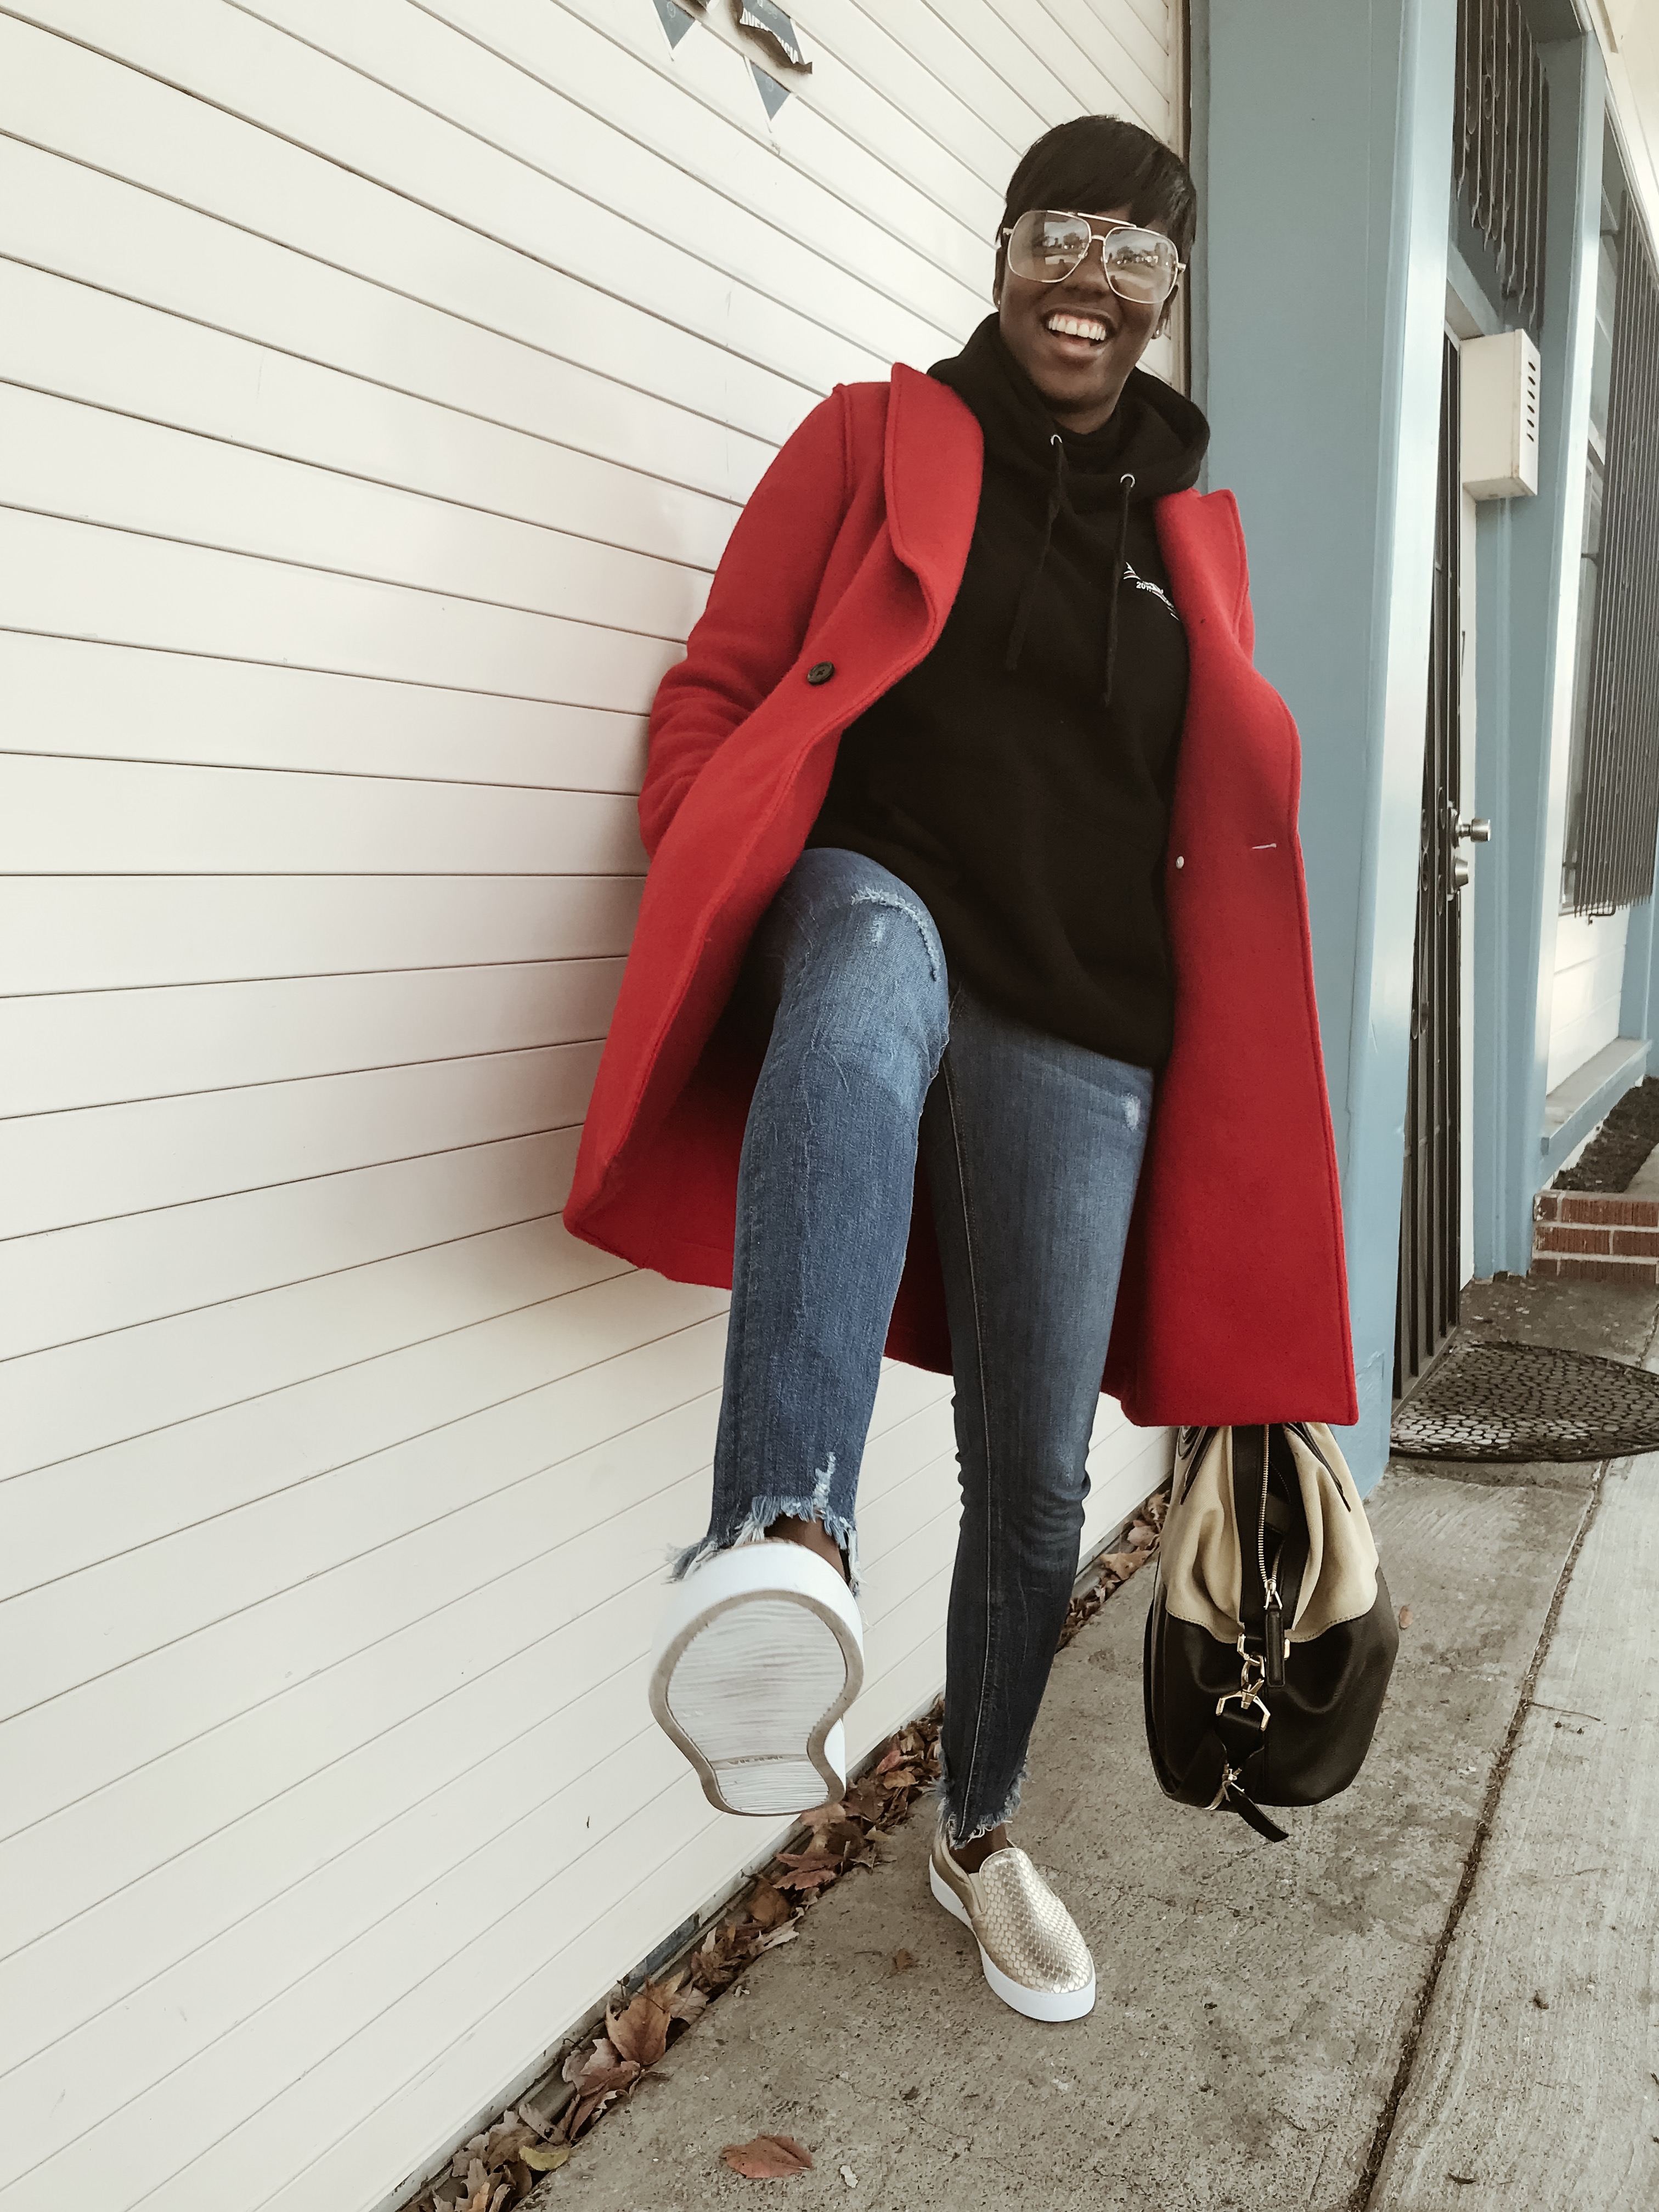 Jcrew Red Coat Cocoa Butter Diaries San Francisco SF Bay Area Fashion Style Blog Blogger